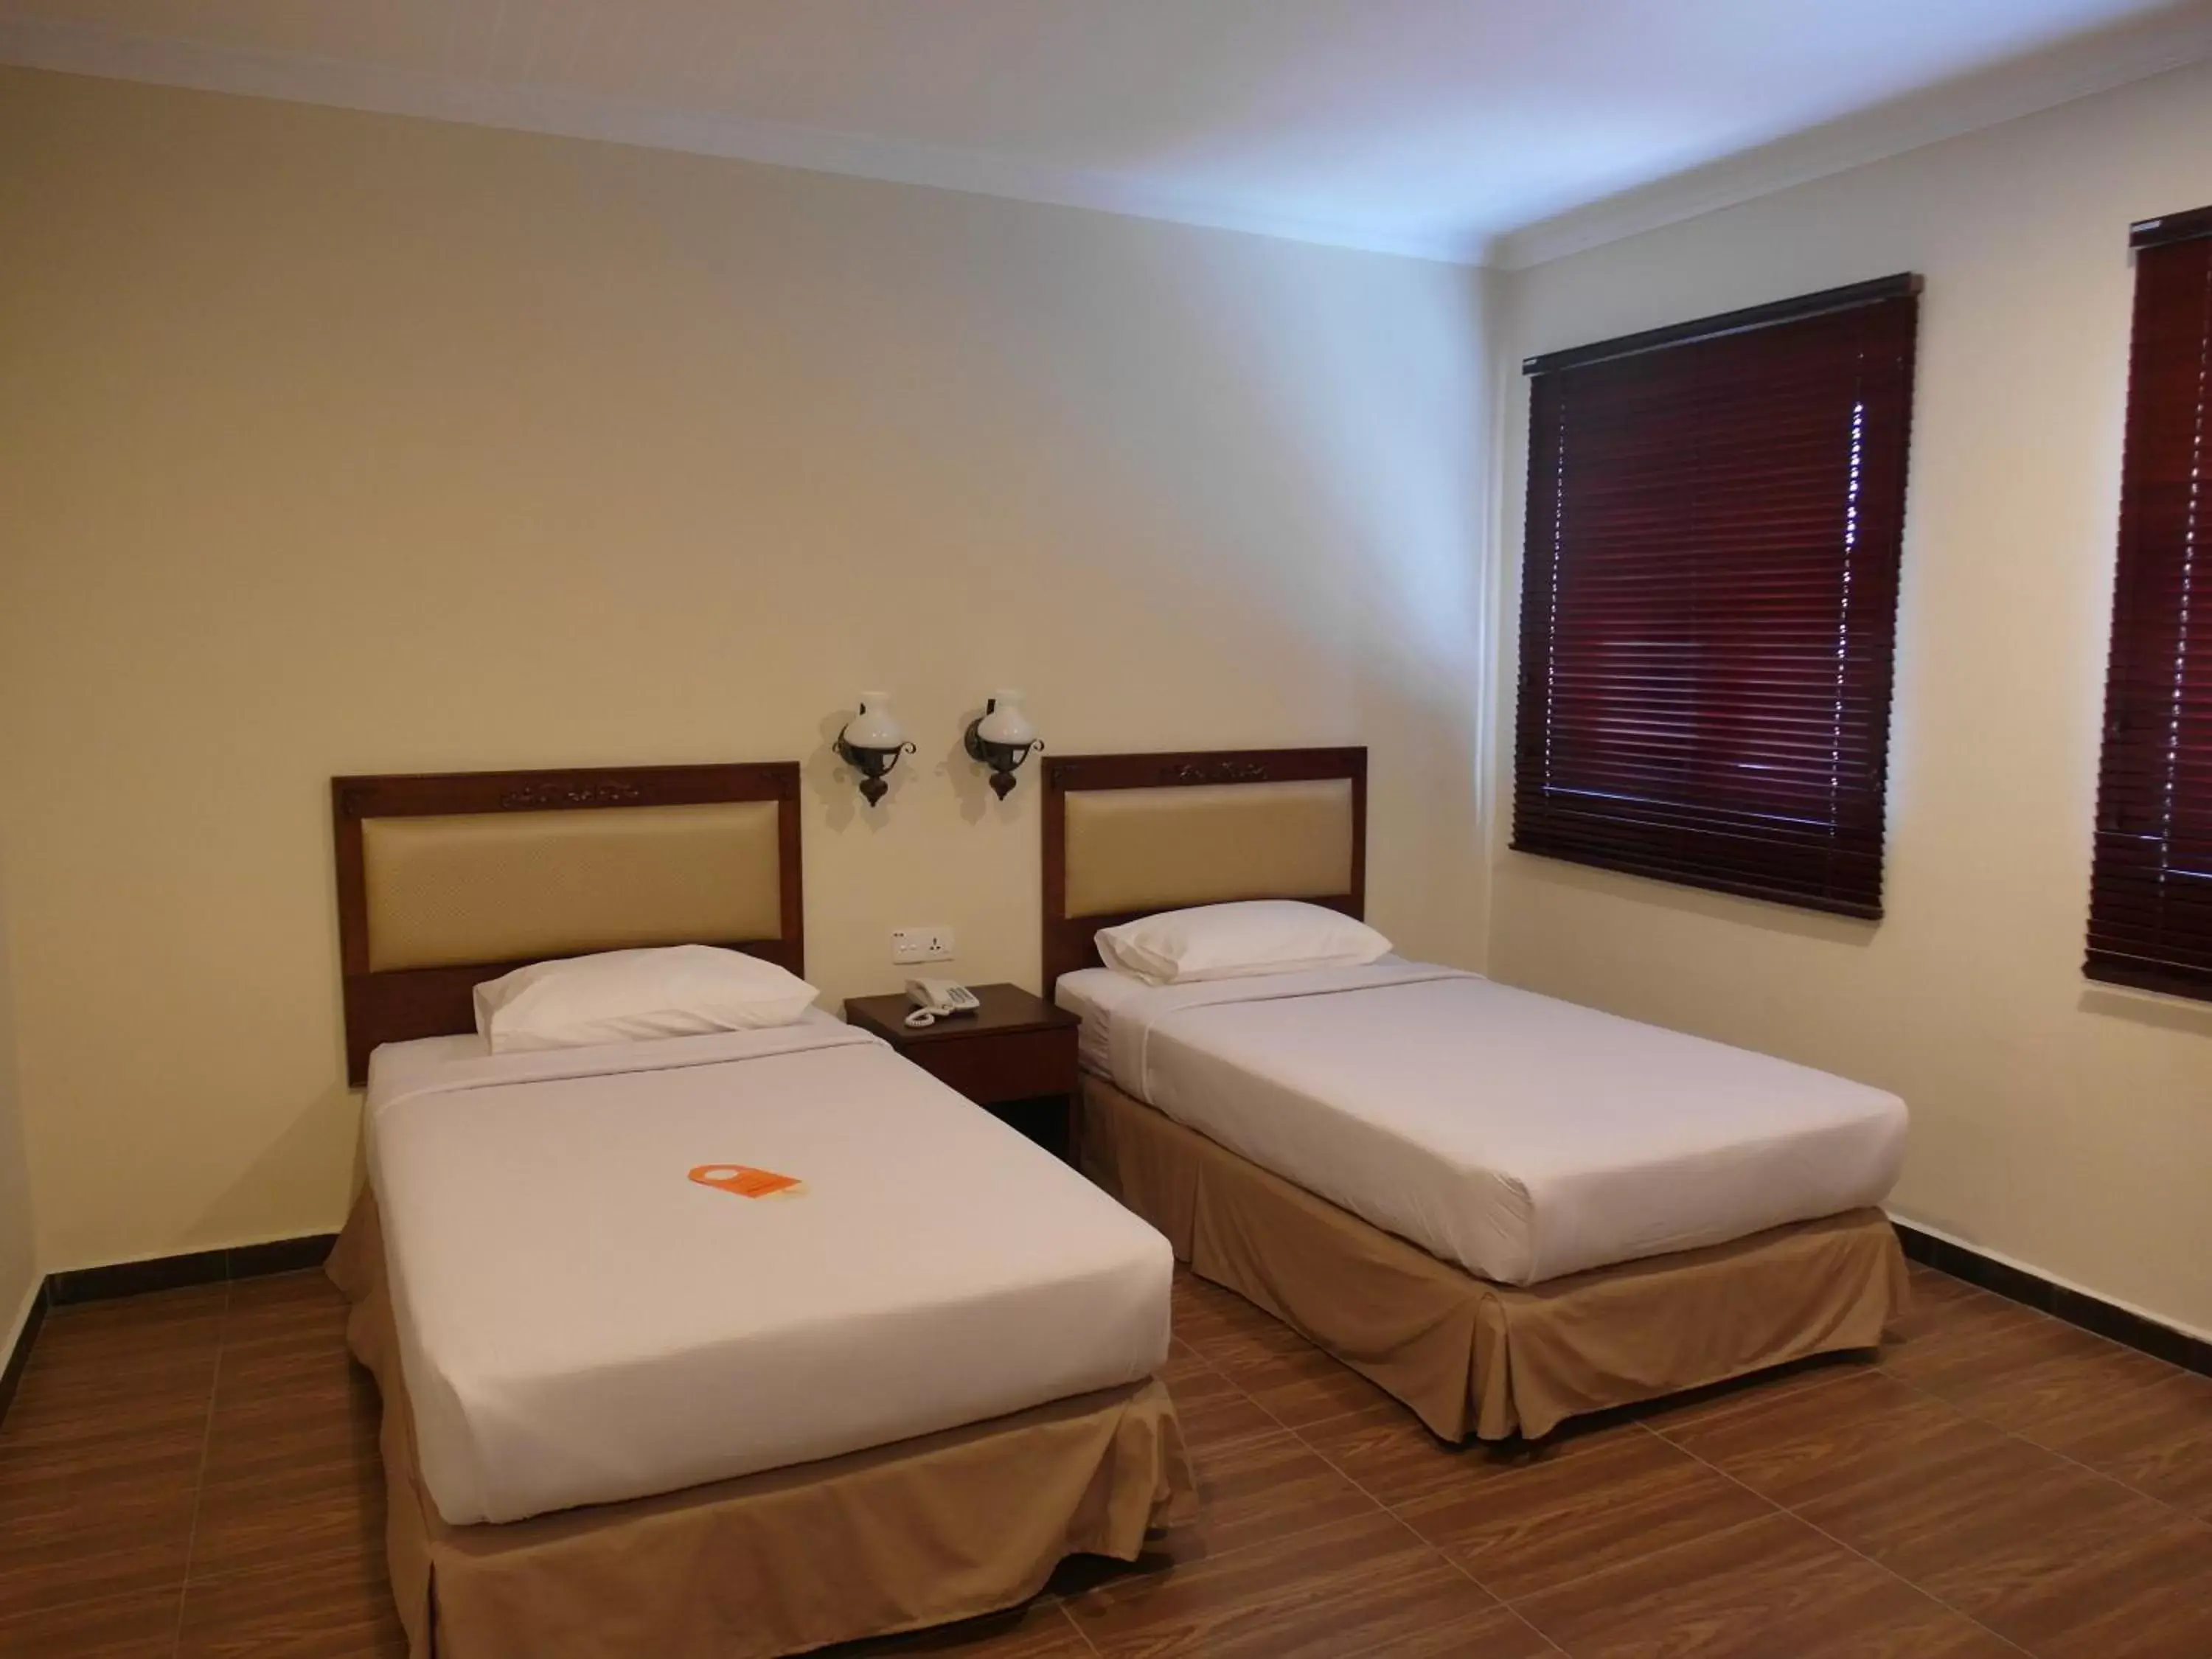 Standard Double or Twin Room in Cheng Ho Hotel